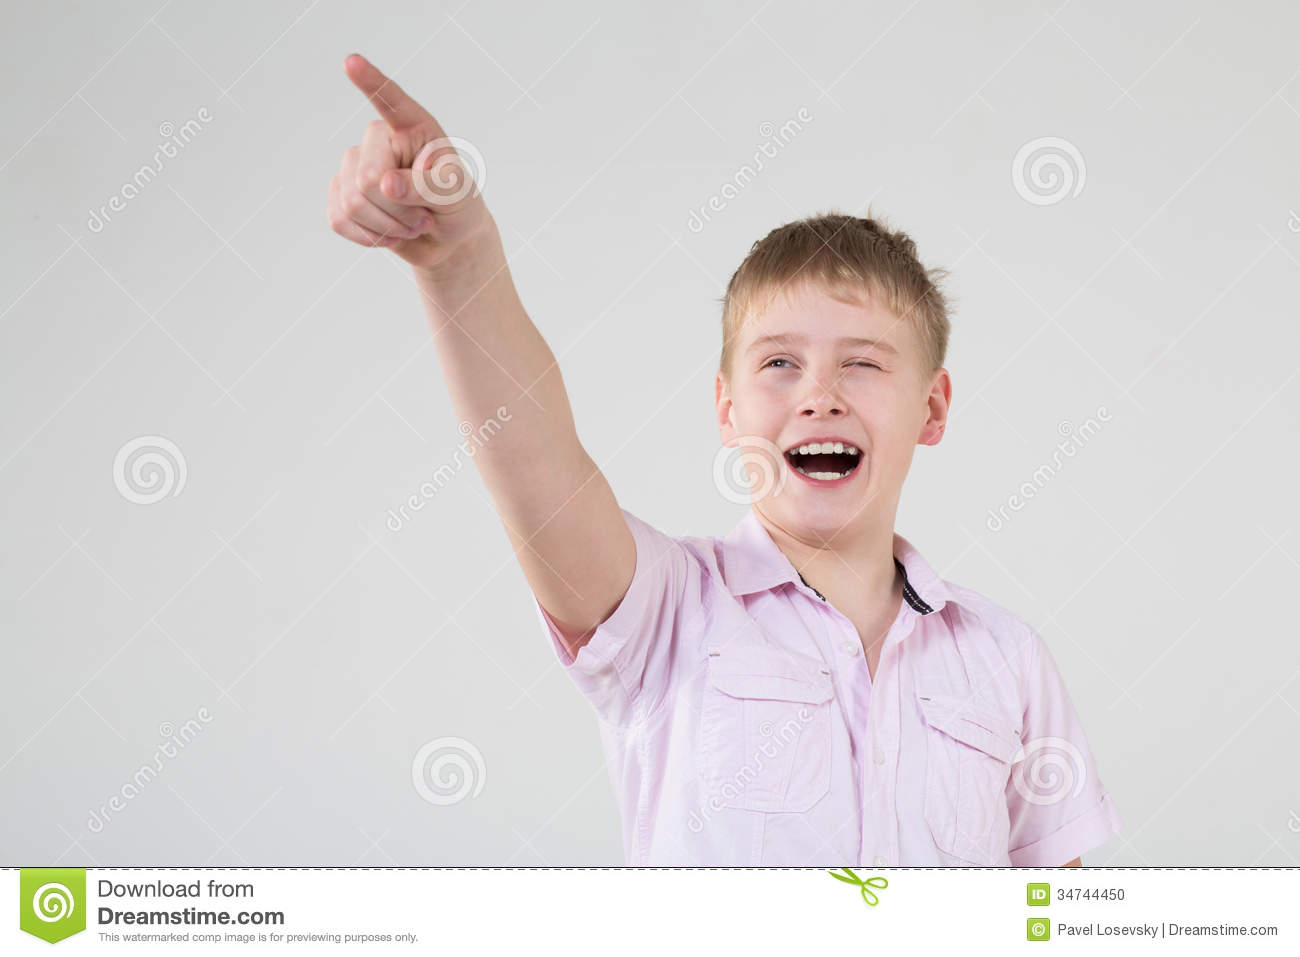 The Boy Squinted And Points A Finger Somewhere Stock Photo   Image